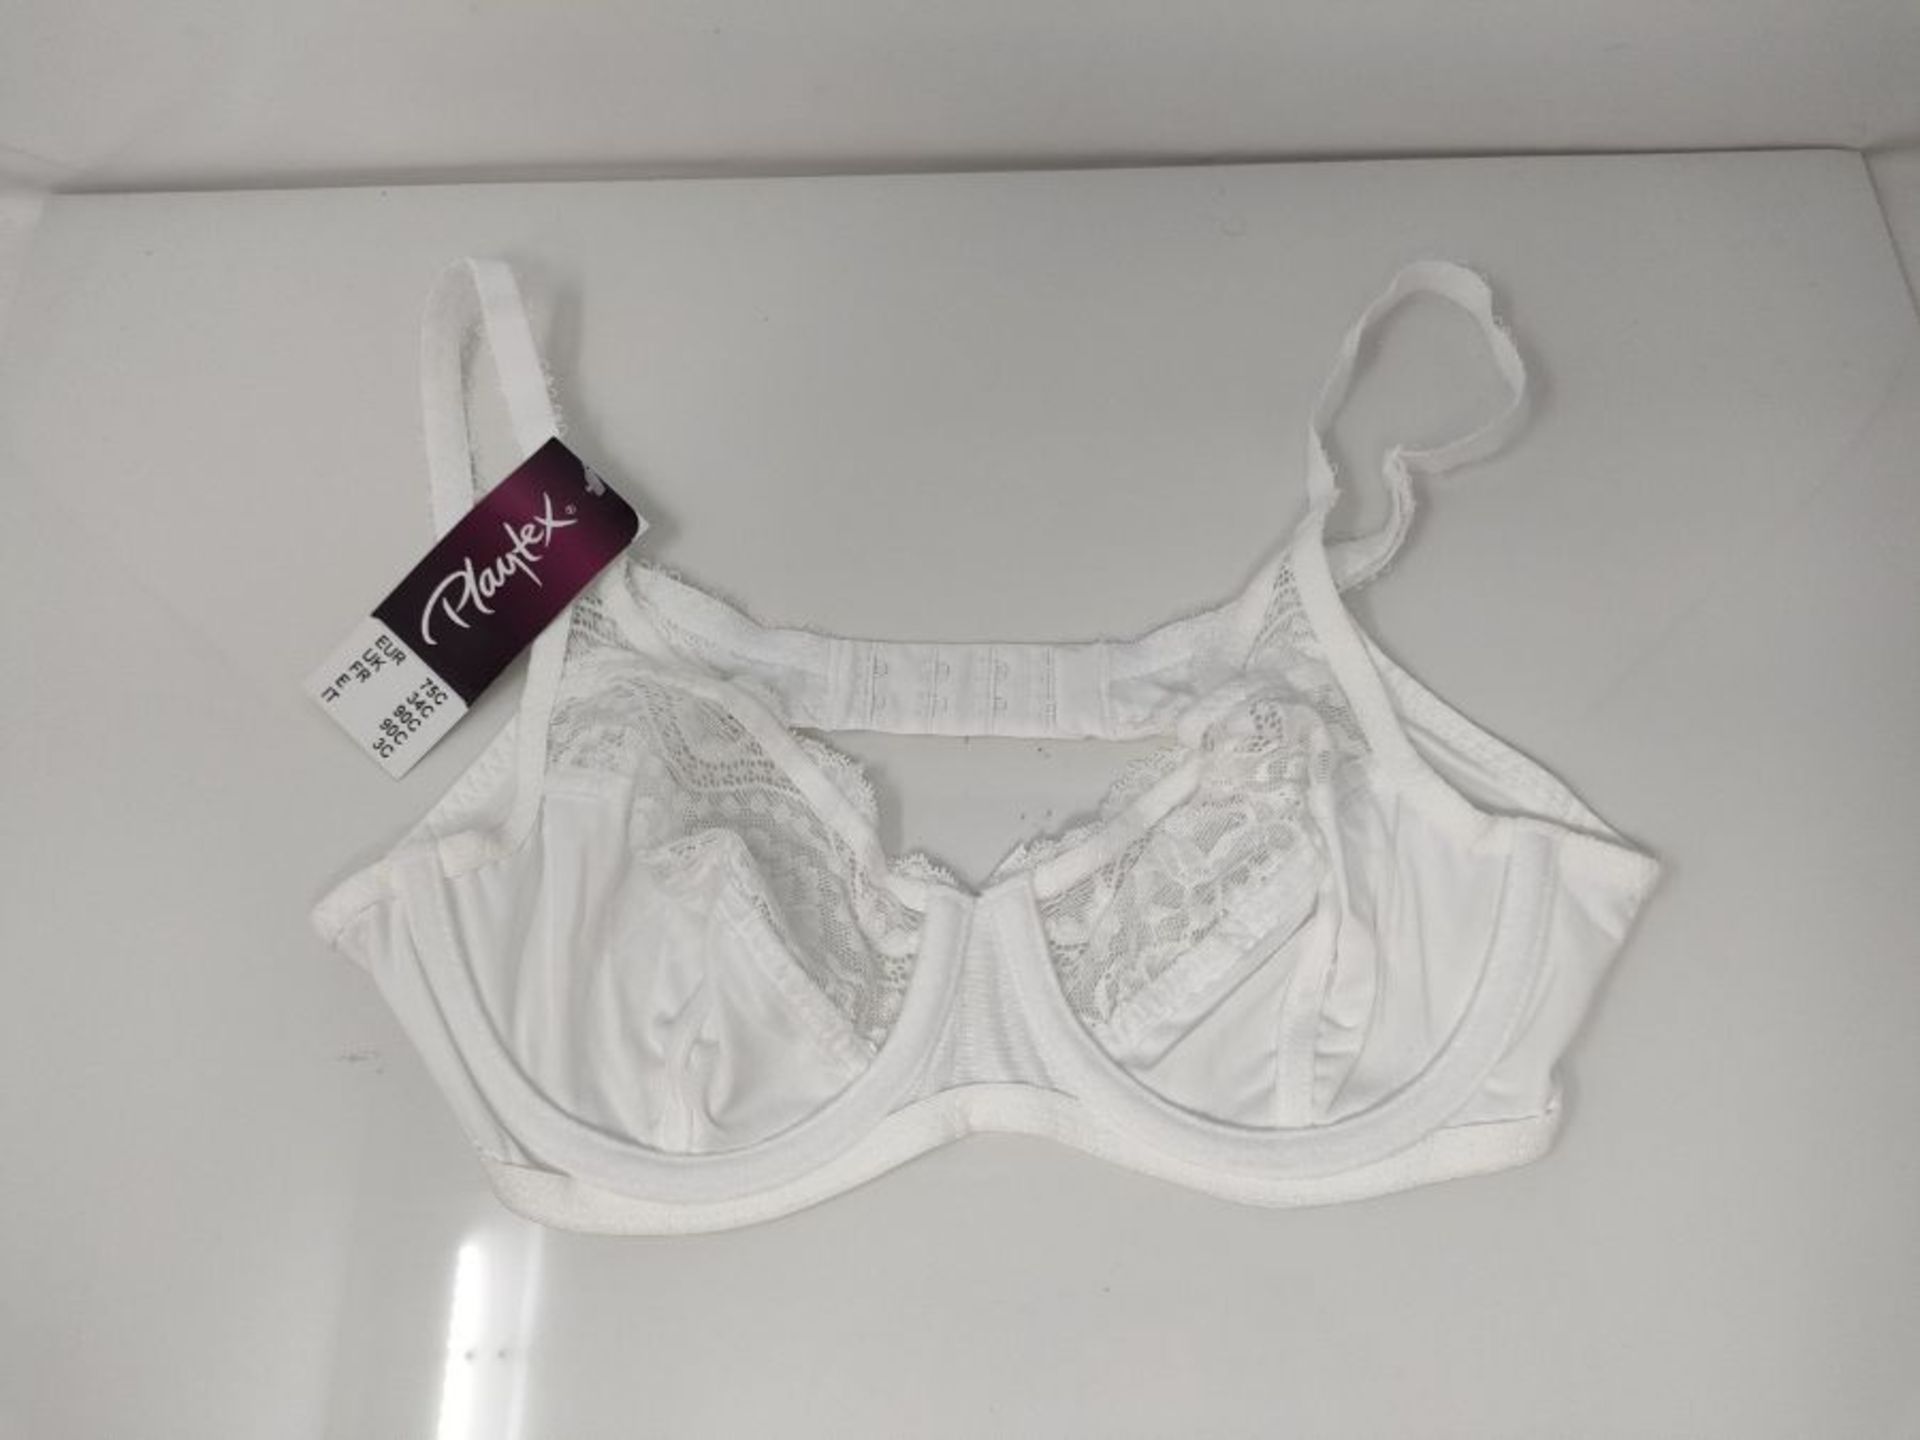 Playtex Women's Flower Elegance Micro Lace Underwired Non-padded wired Bra, White (Bla - Image 2 of 3